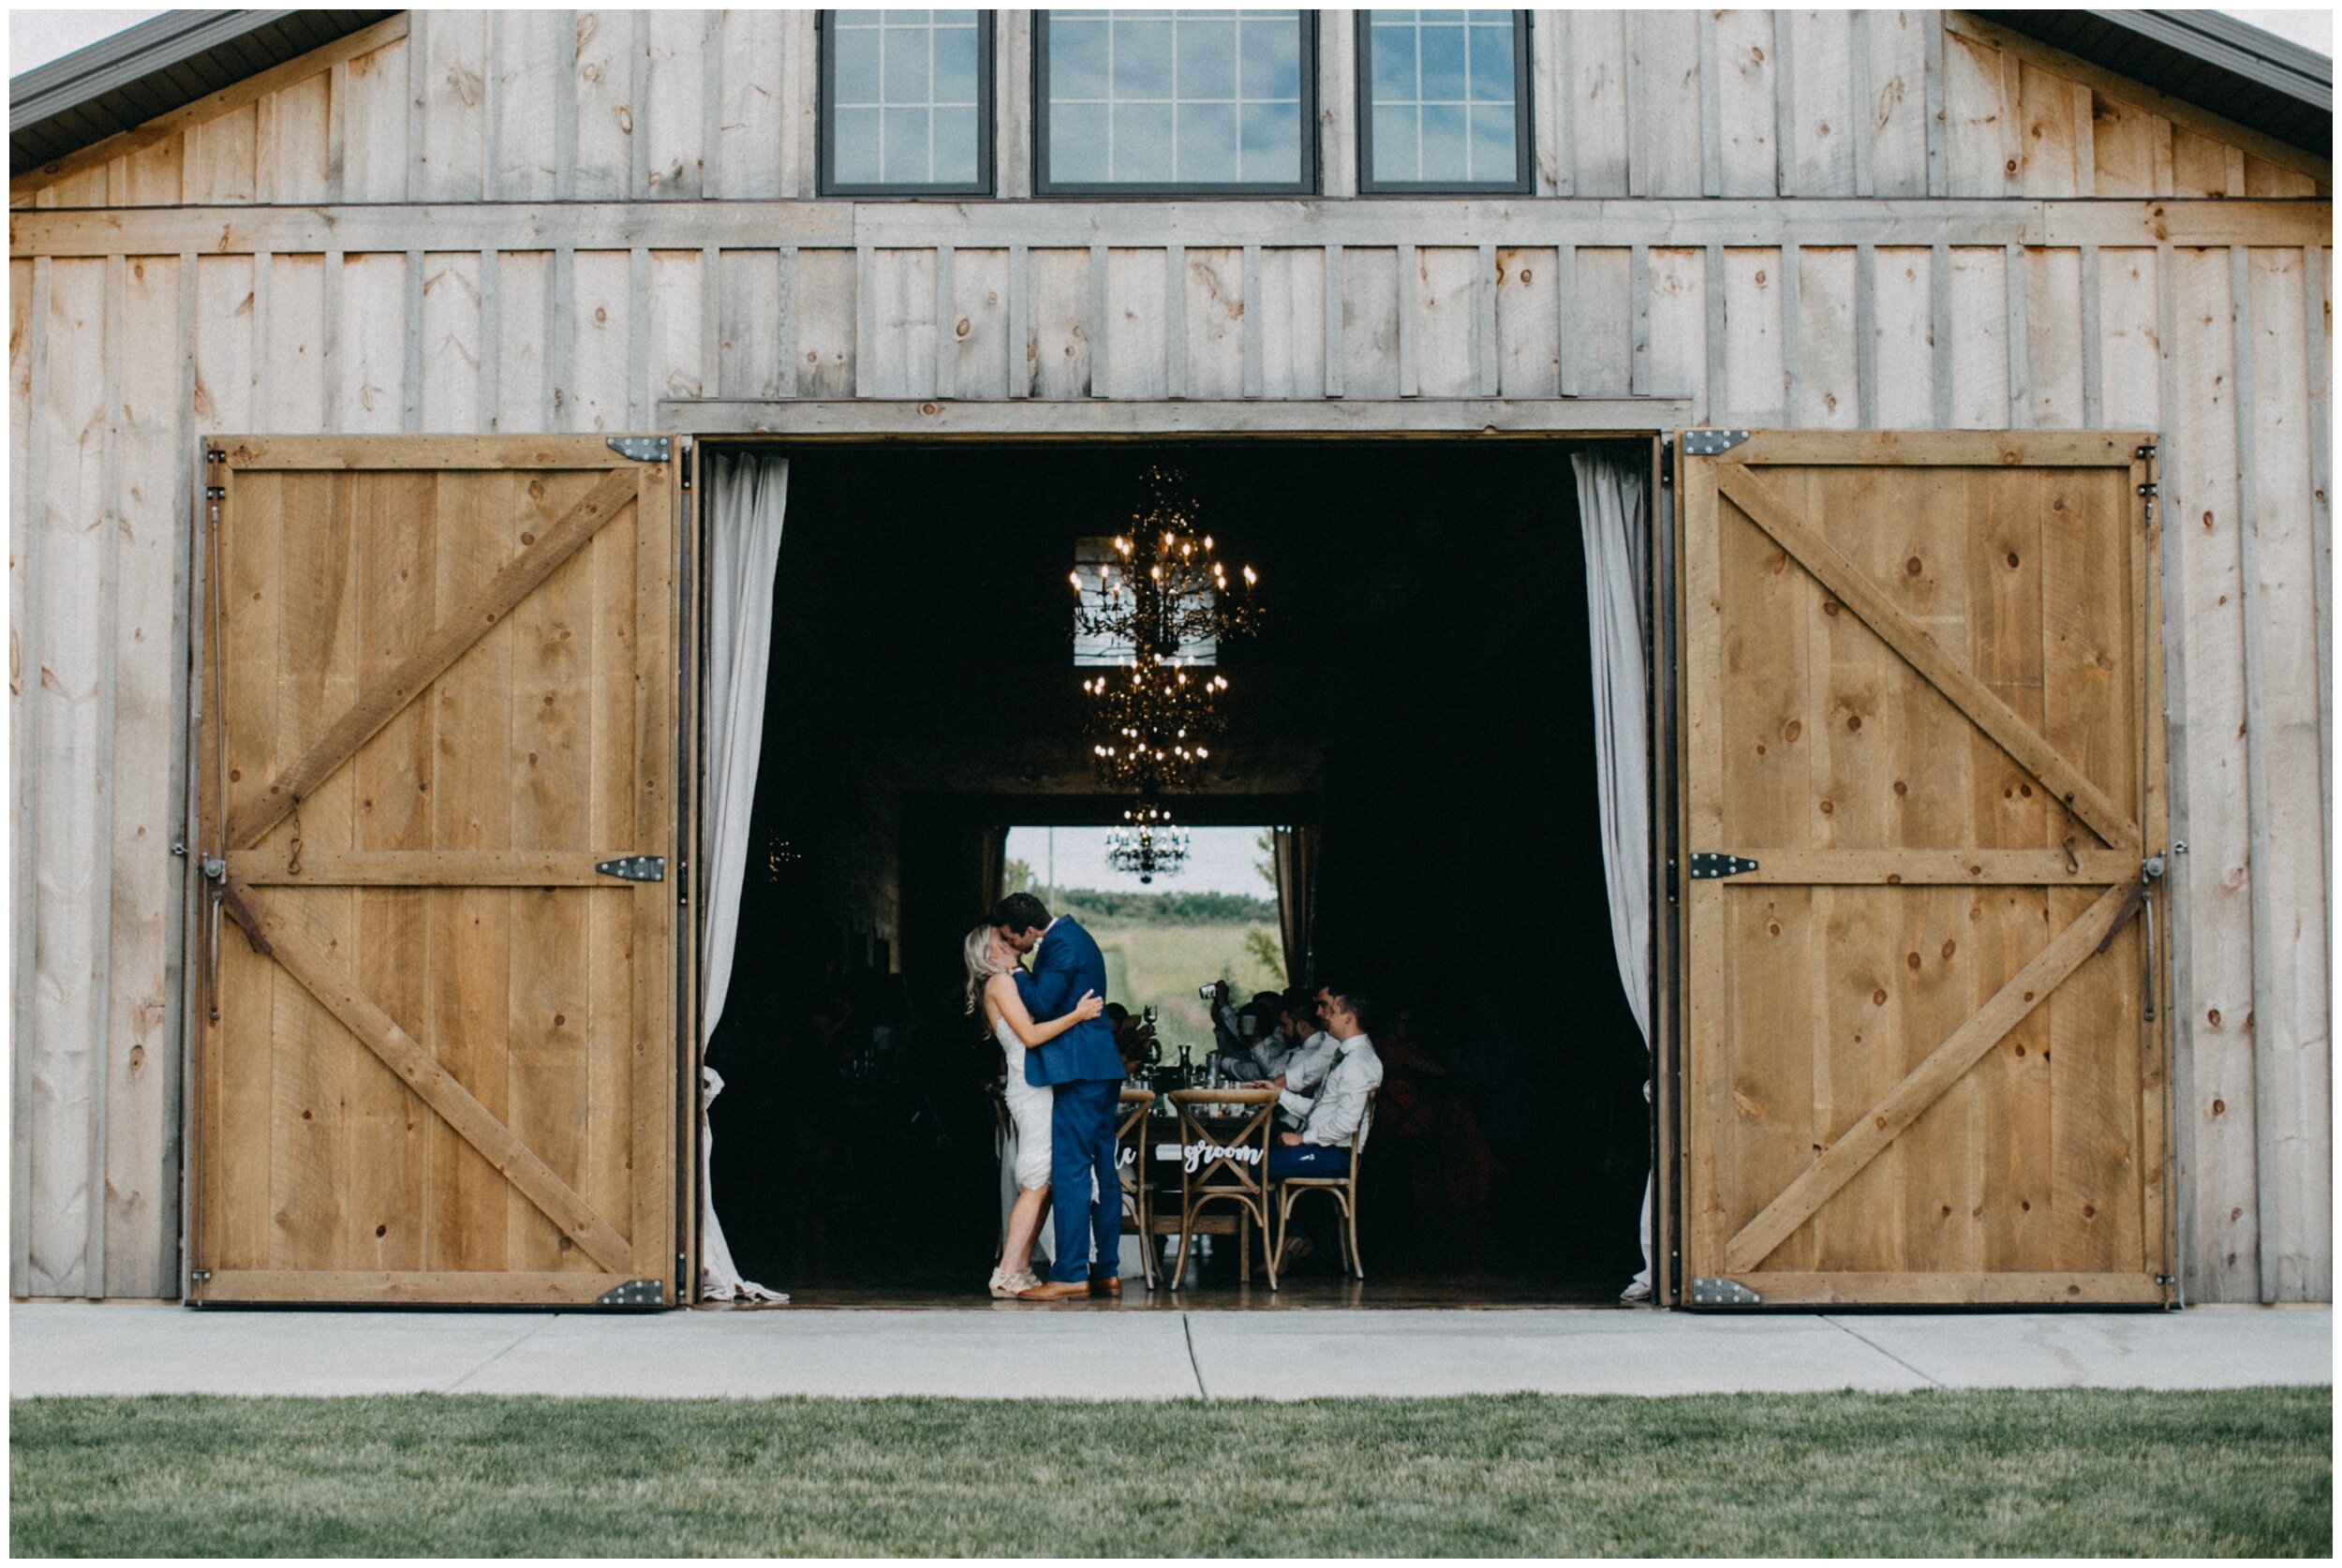 Bride and groom kissing in barn during wedding reception at Creekside Farm in Rush City, Minnesota